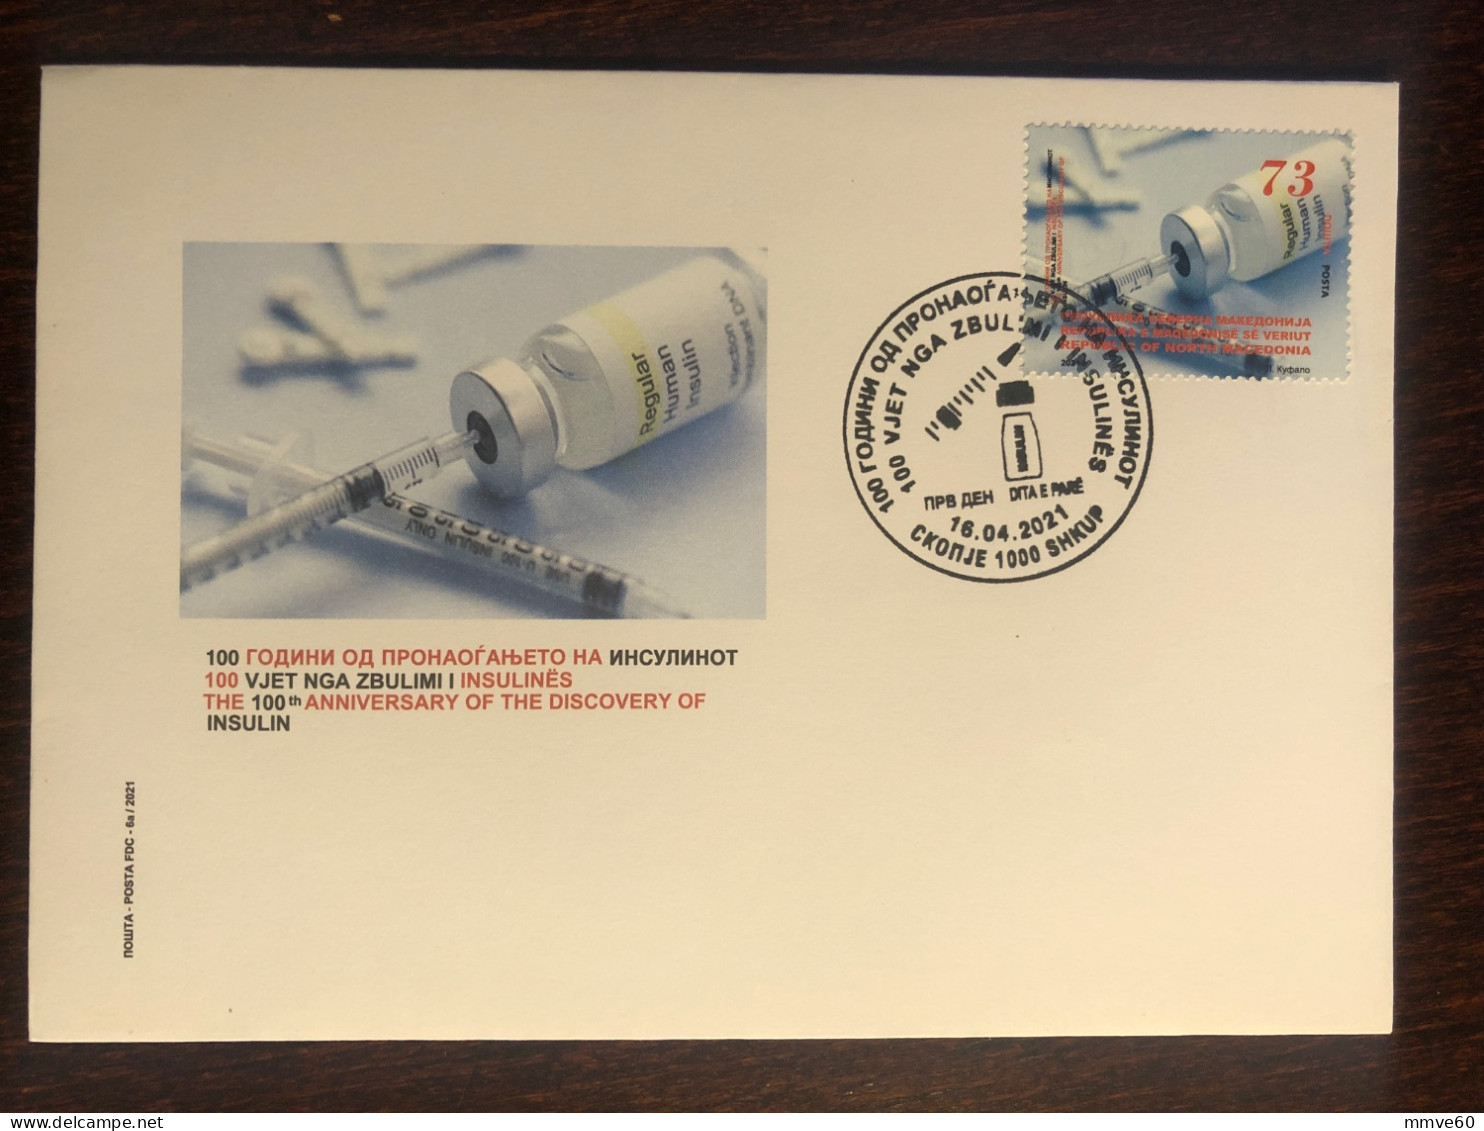 MACEDONIA FDC COVER 2021 YEAR DIABETES INSULIN HEALTH MEDICINE STAMPS - Nordmazedonien